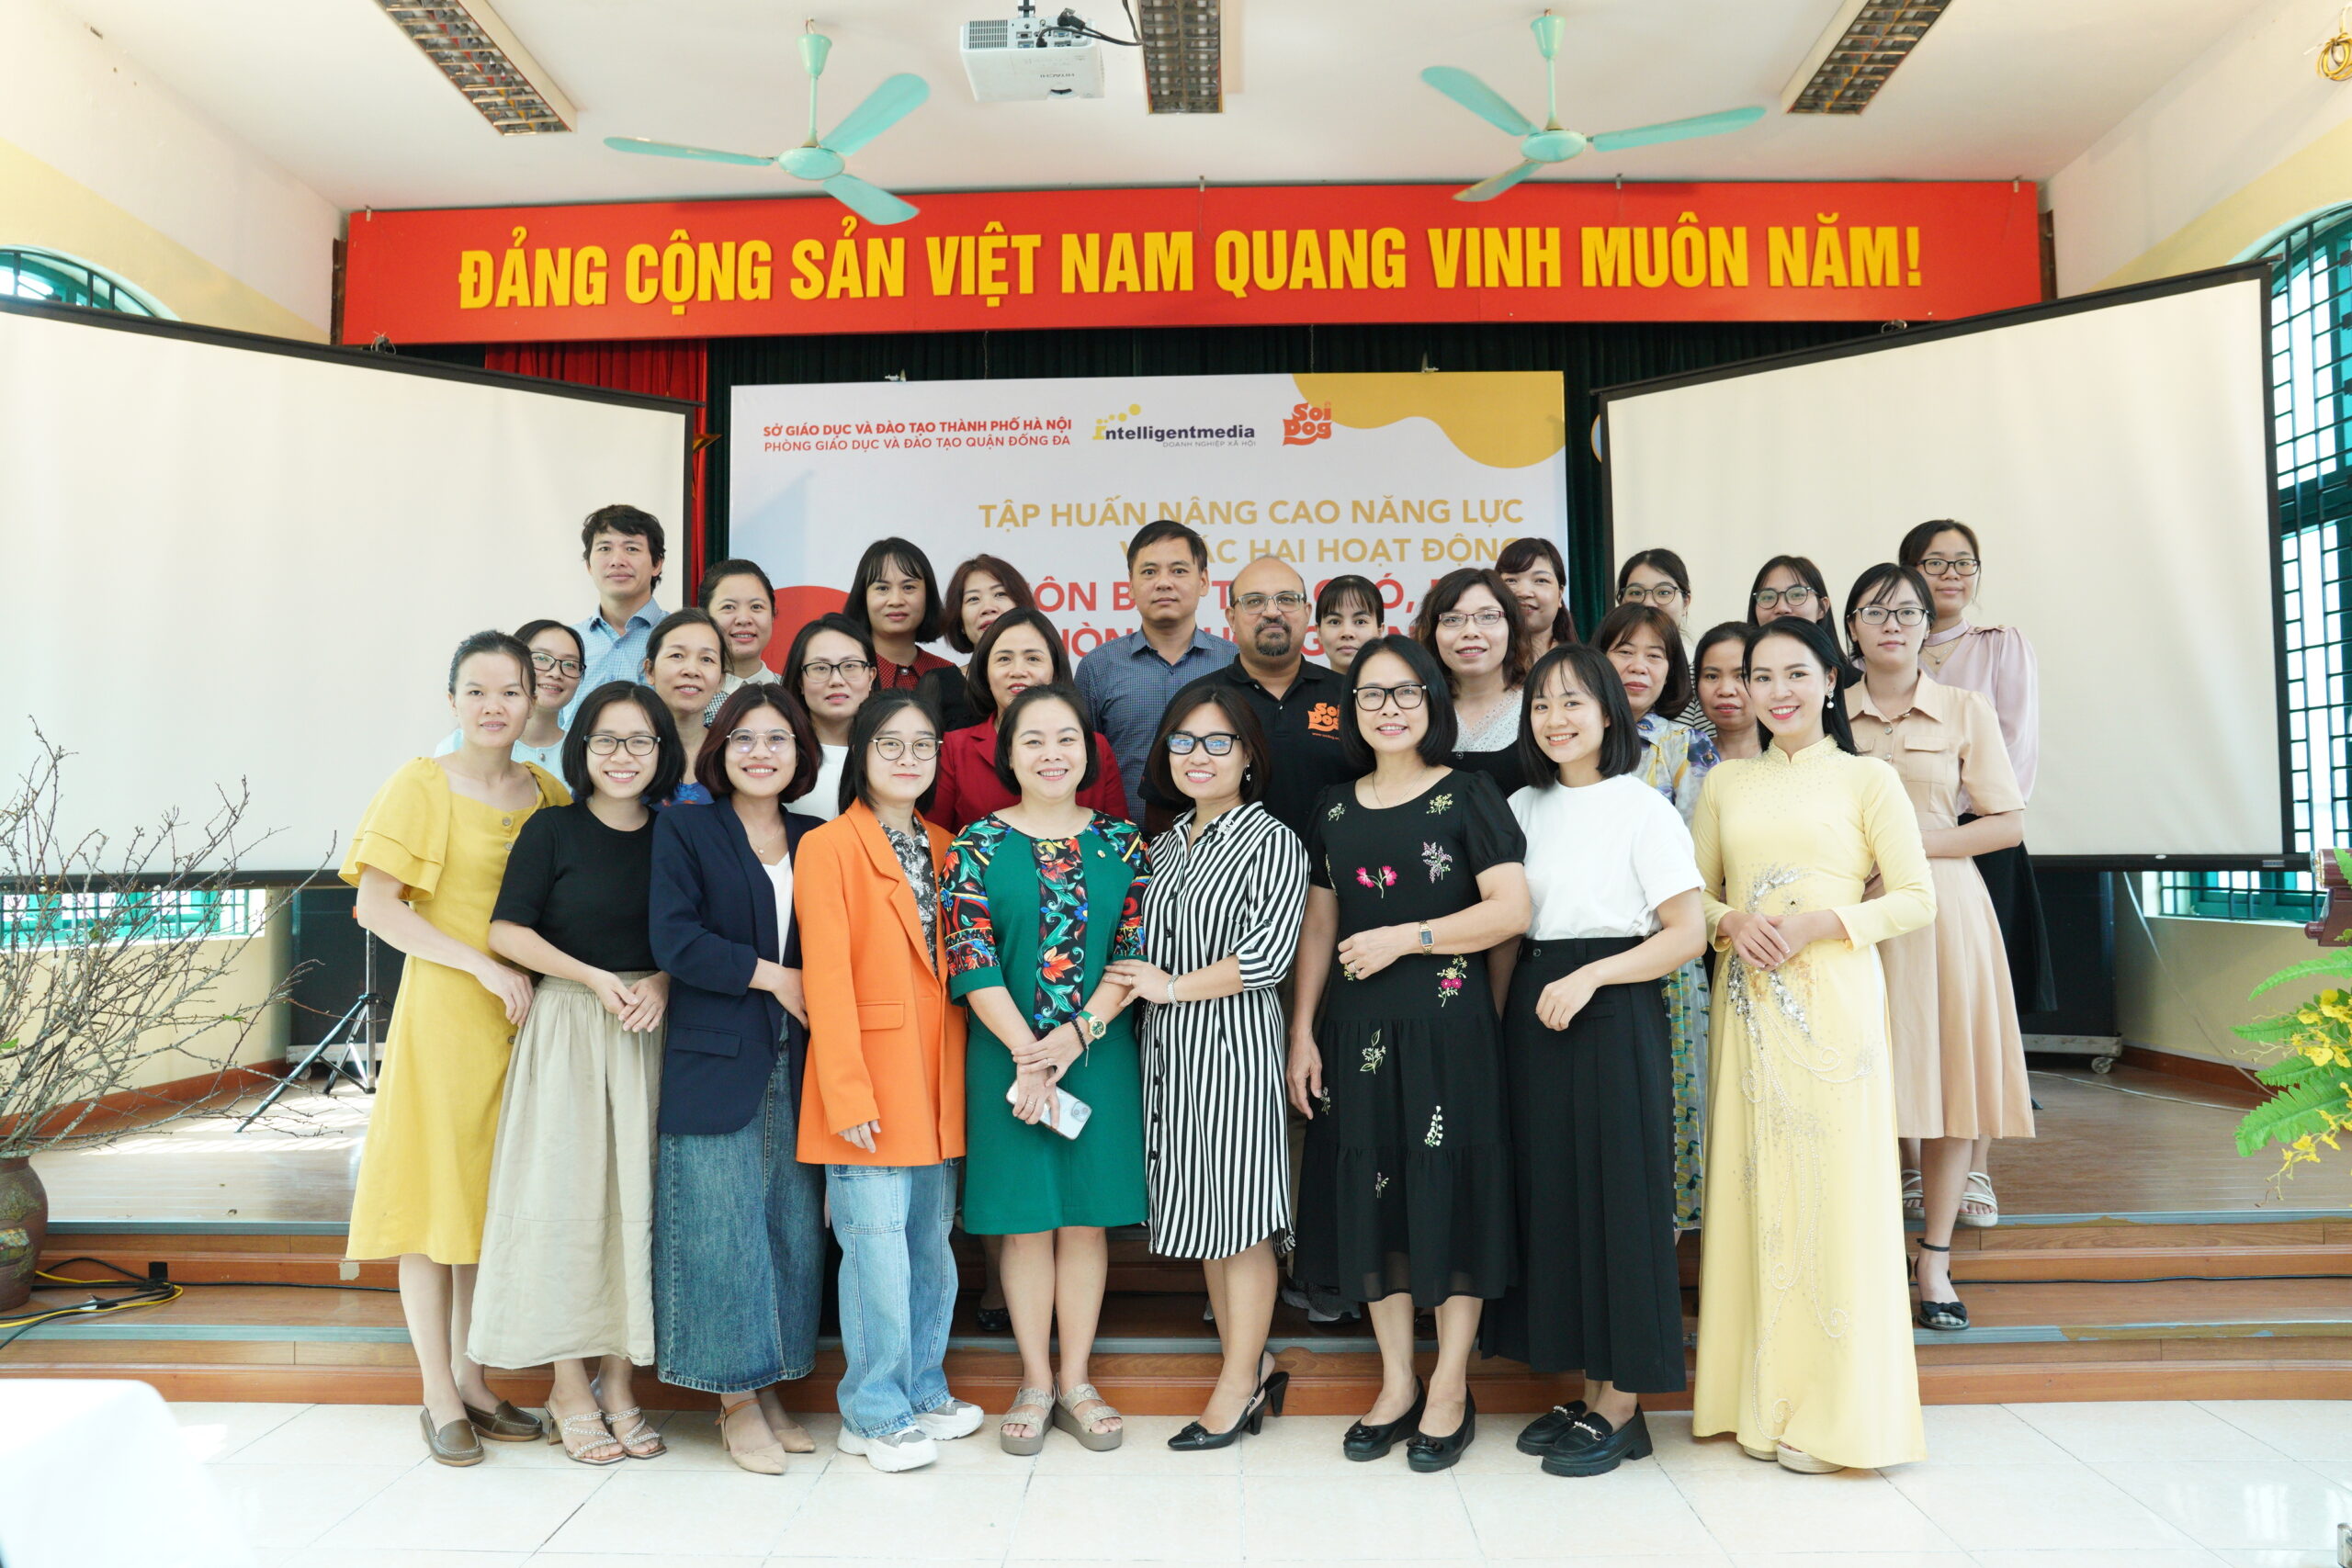 Teachers in Hanoi commit to educating their students about the realities of the dog and cat meat trade.